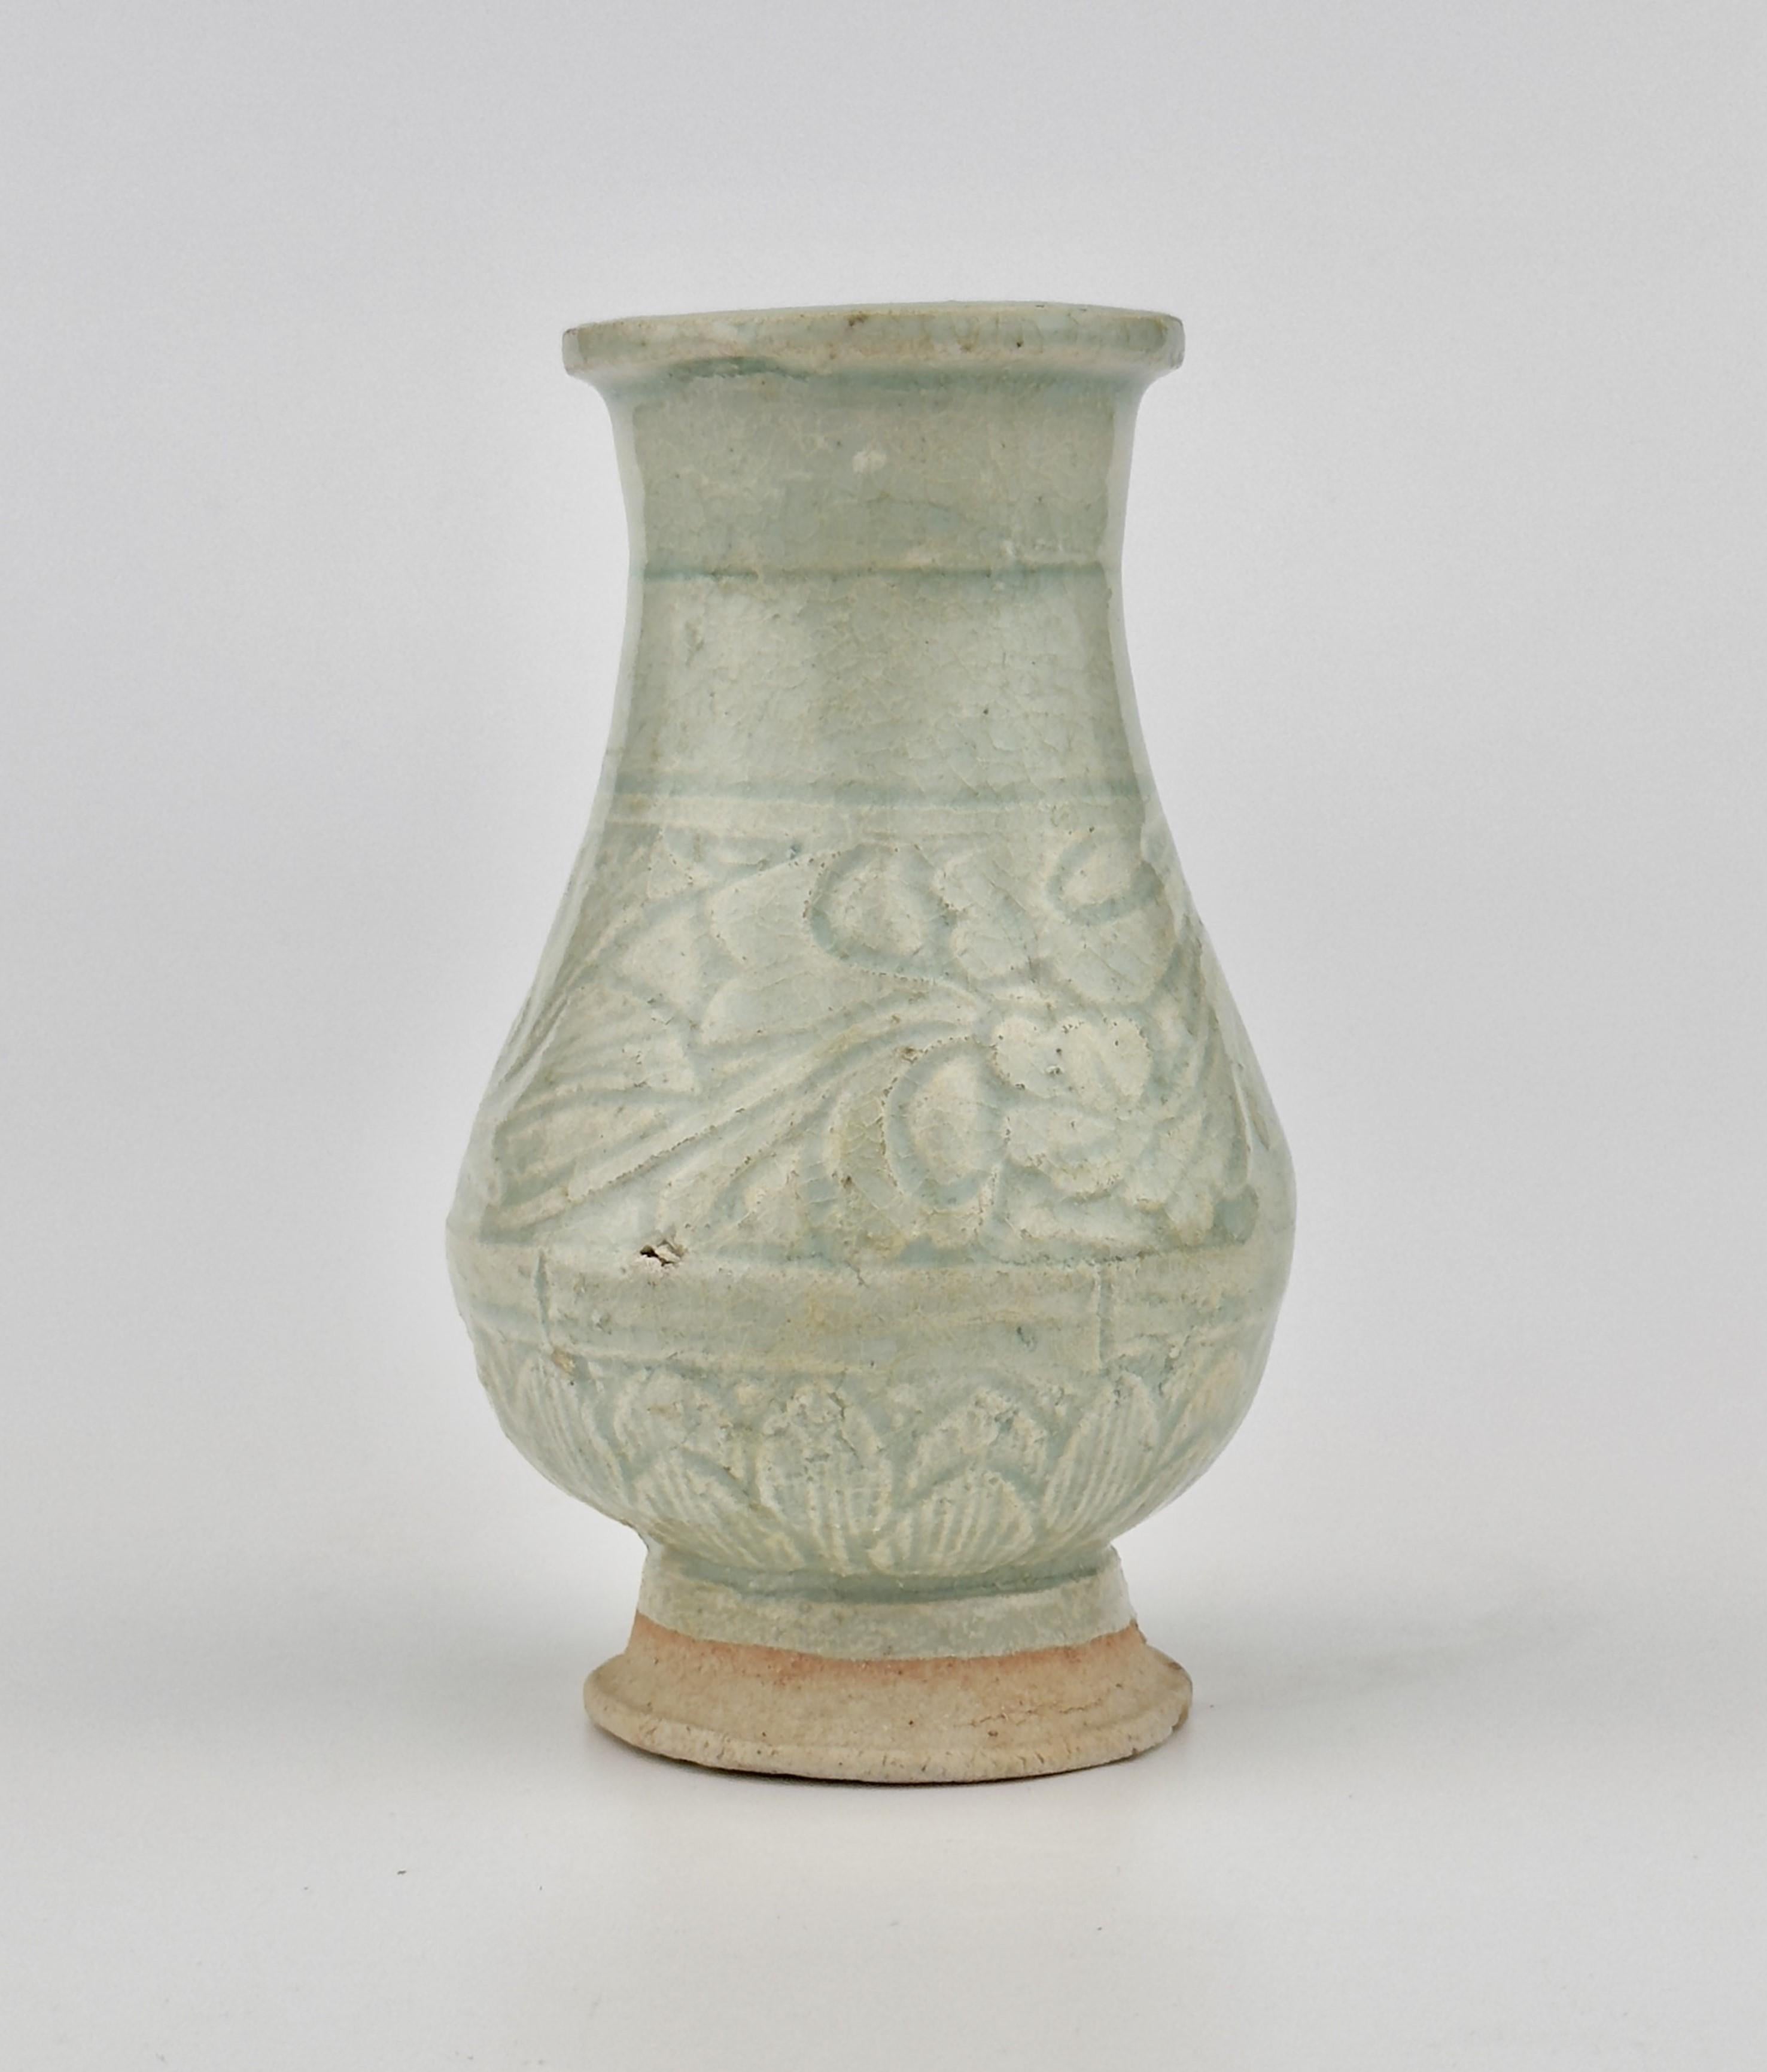 This vase is made from a type of low-fired, porous clay and features a crackled glaze. It bears resemblance to the renowned funerary vases and covers adorned with applied decorations.

Period : Yuan Dynasty(1271-1368)
Type : Baluster vase
Medium :